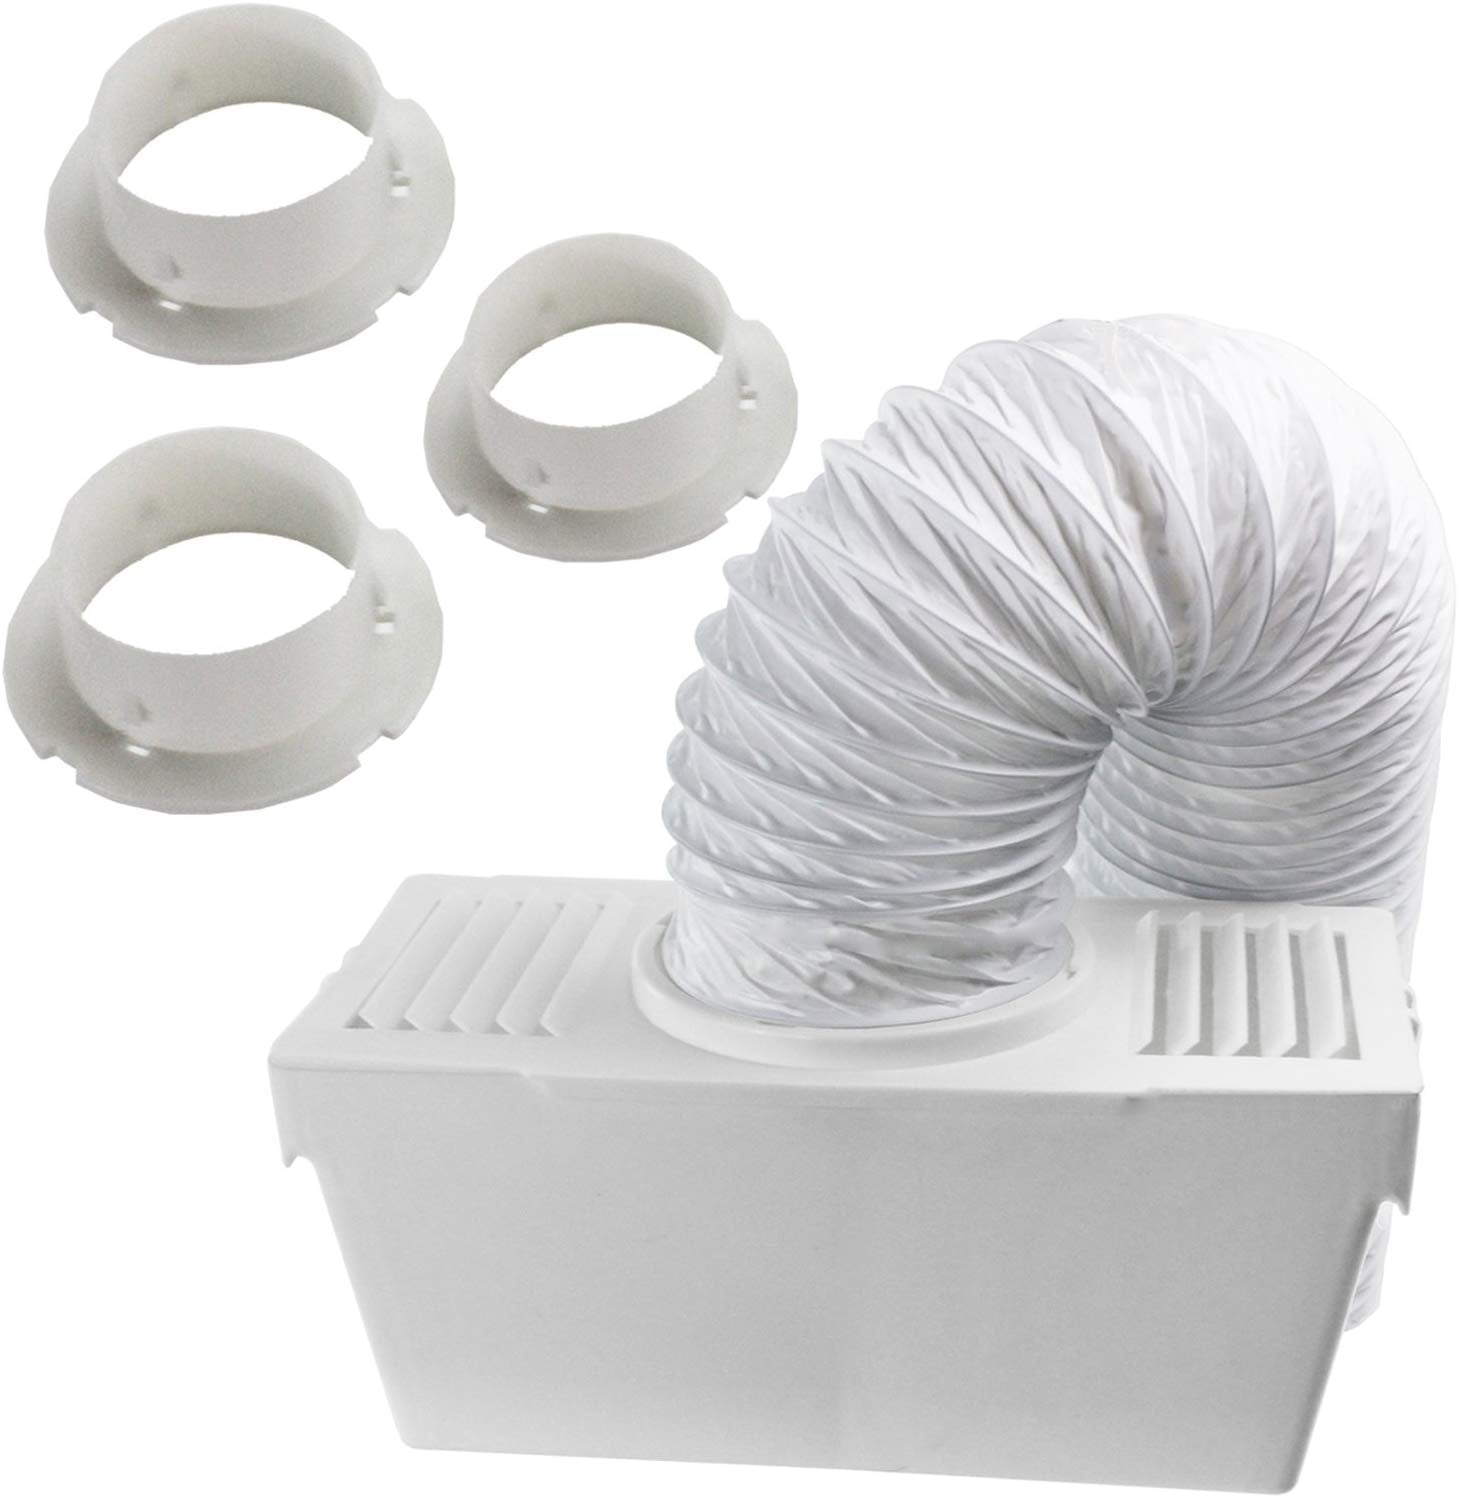 Vent Hose Condenser Kit with 3 x Adapters for Bush Tumble Dryer (1.2m)